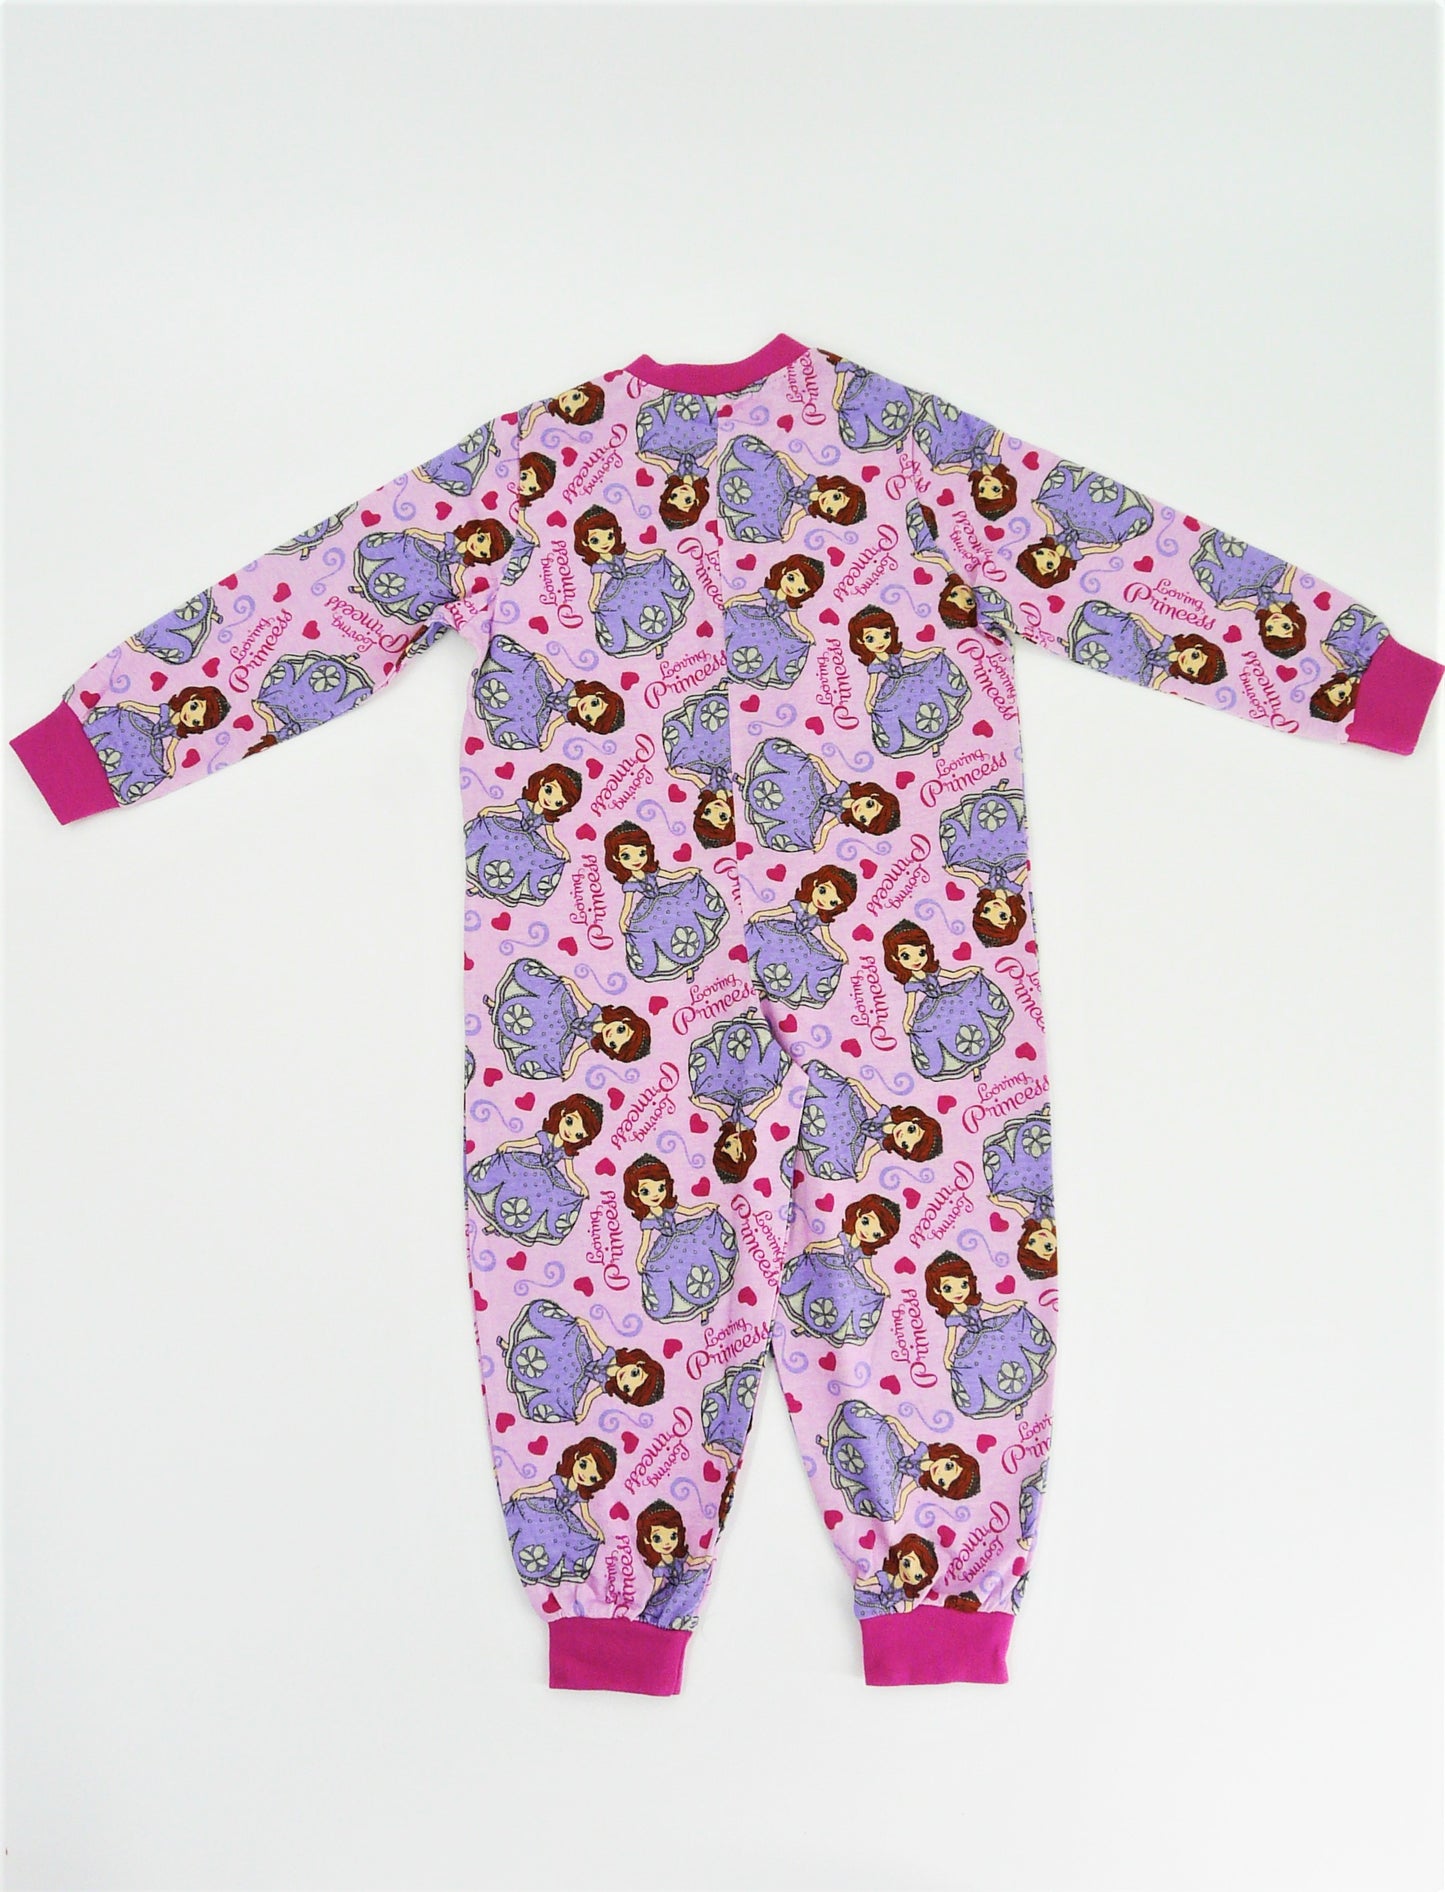 Sofia the First Girl's Pink All in one Sleepsuit Age 18 Months To 3 Years.